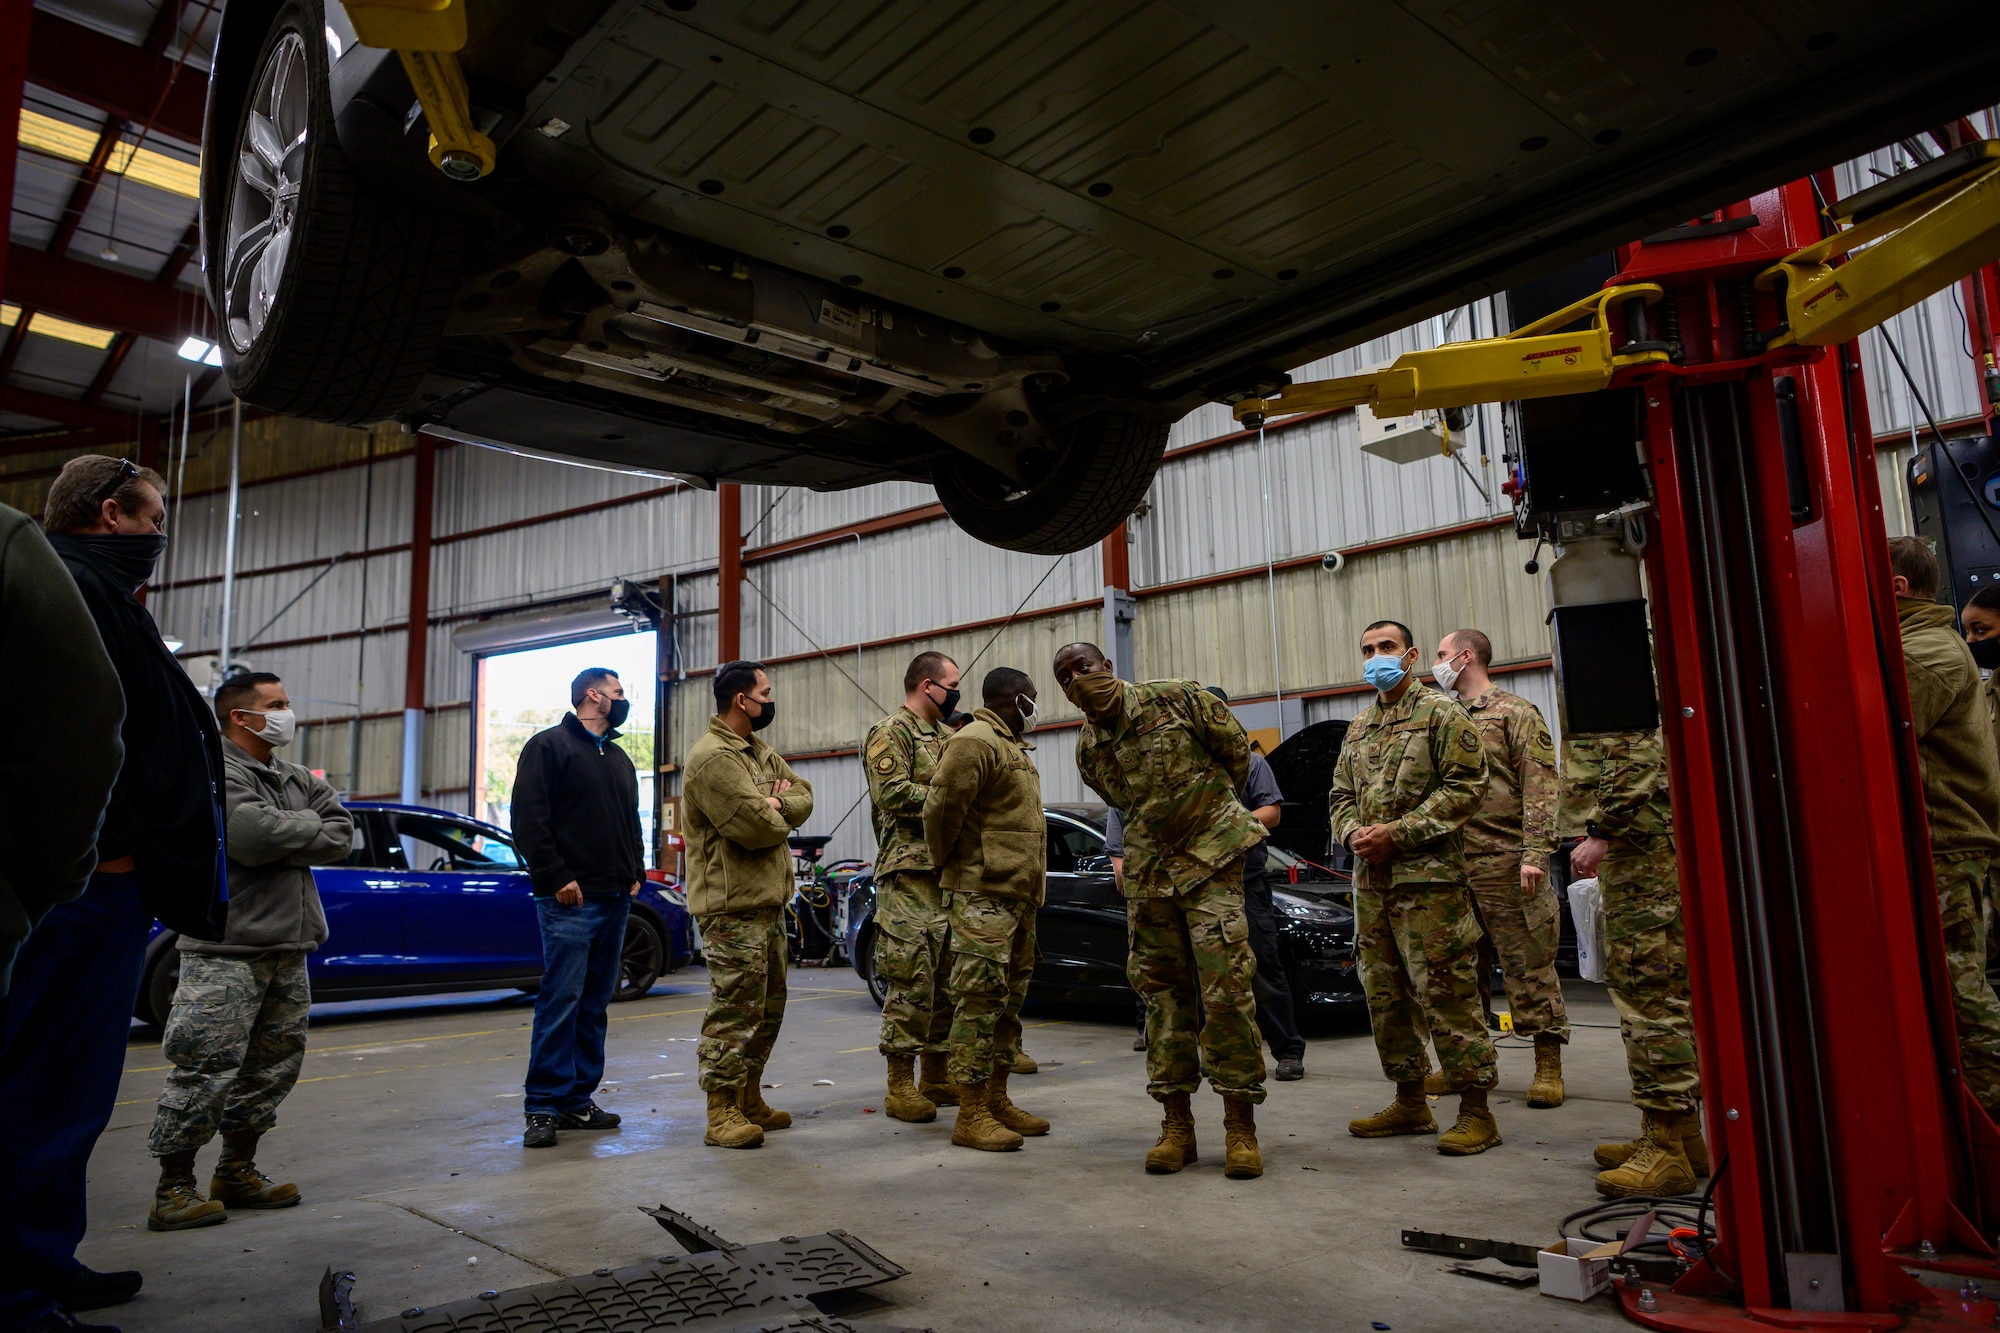 Airmen stand around a lifted Tesla vehicle inside a large warehouse.